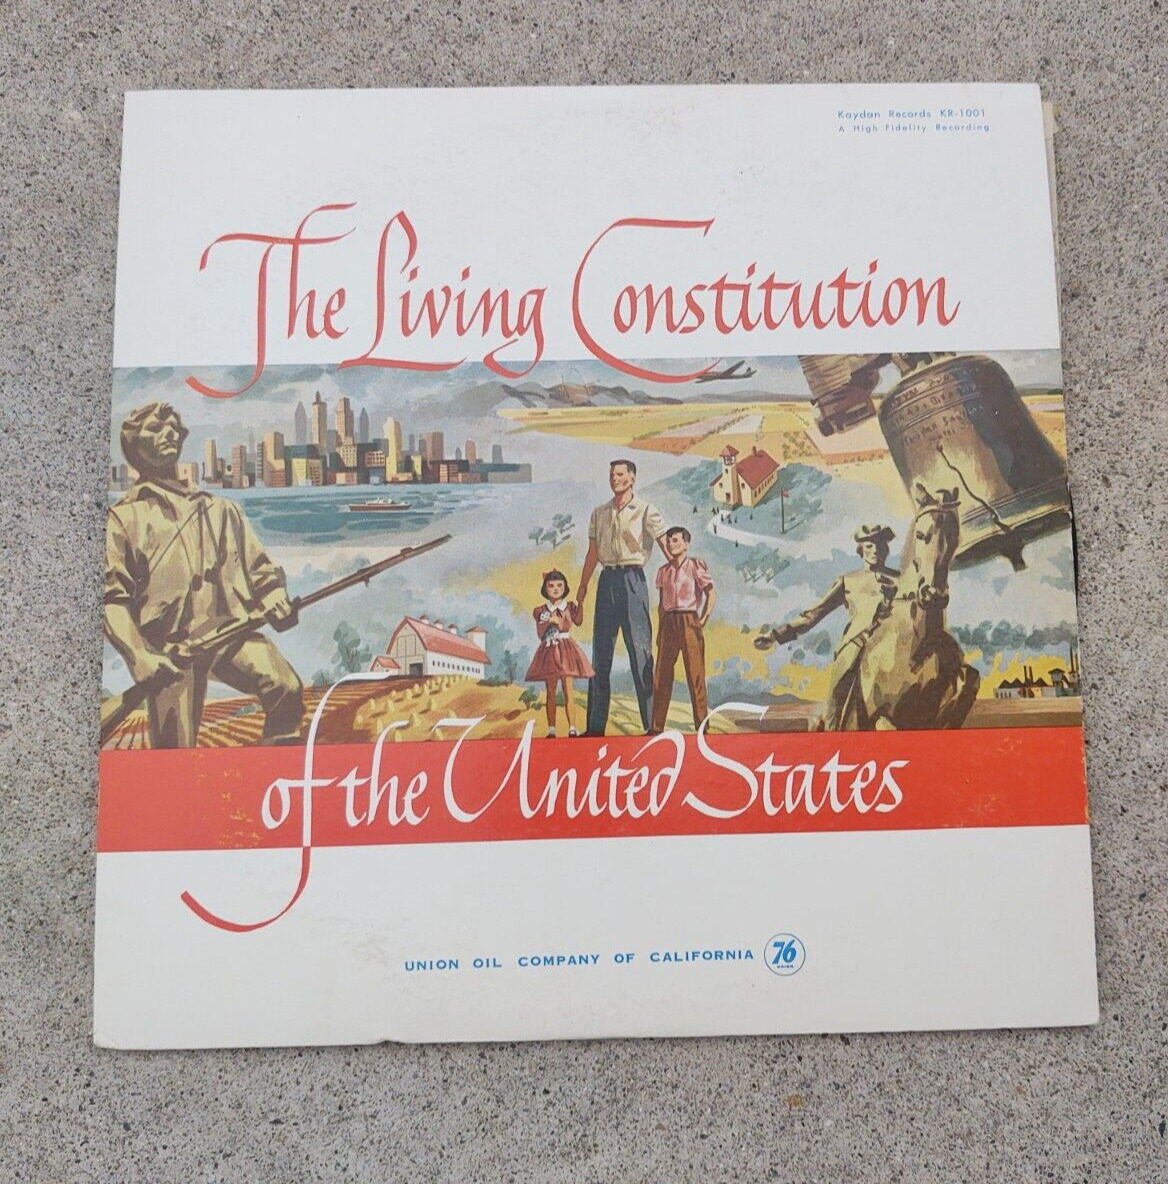 THE LIVING CONSTITUTION OF THE UNITED STATES VINYL RECORD LP 1961 UNION OIL CO.